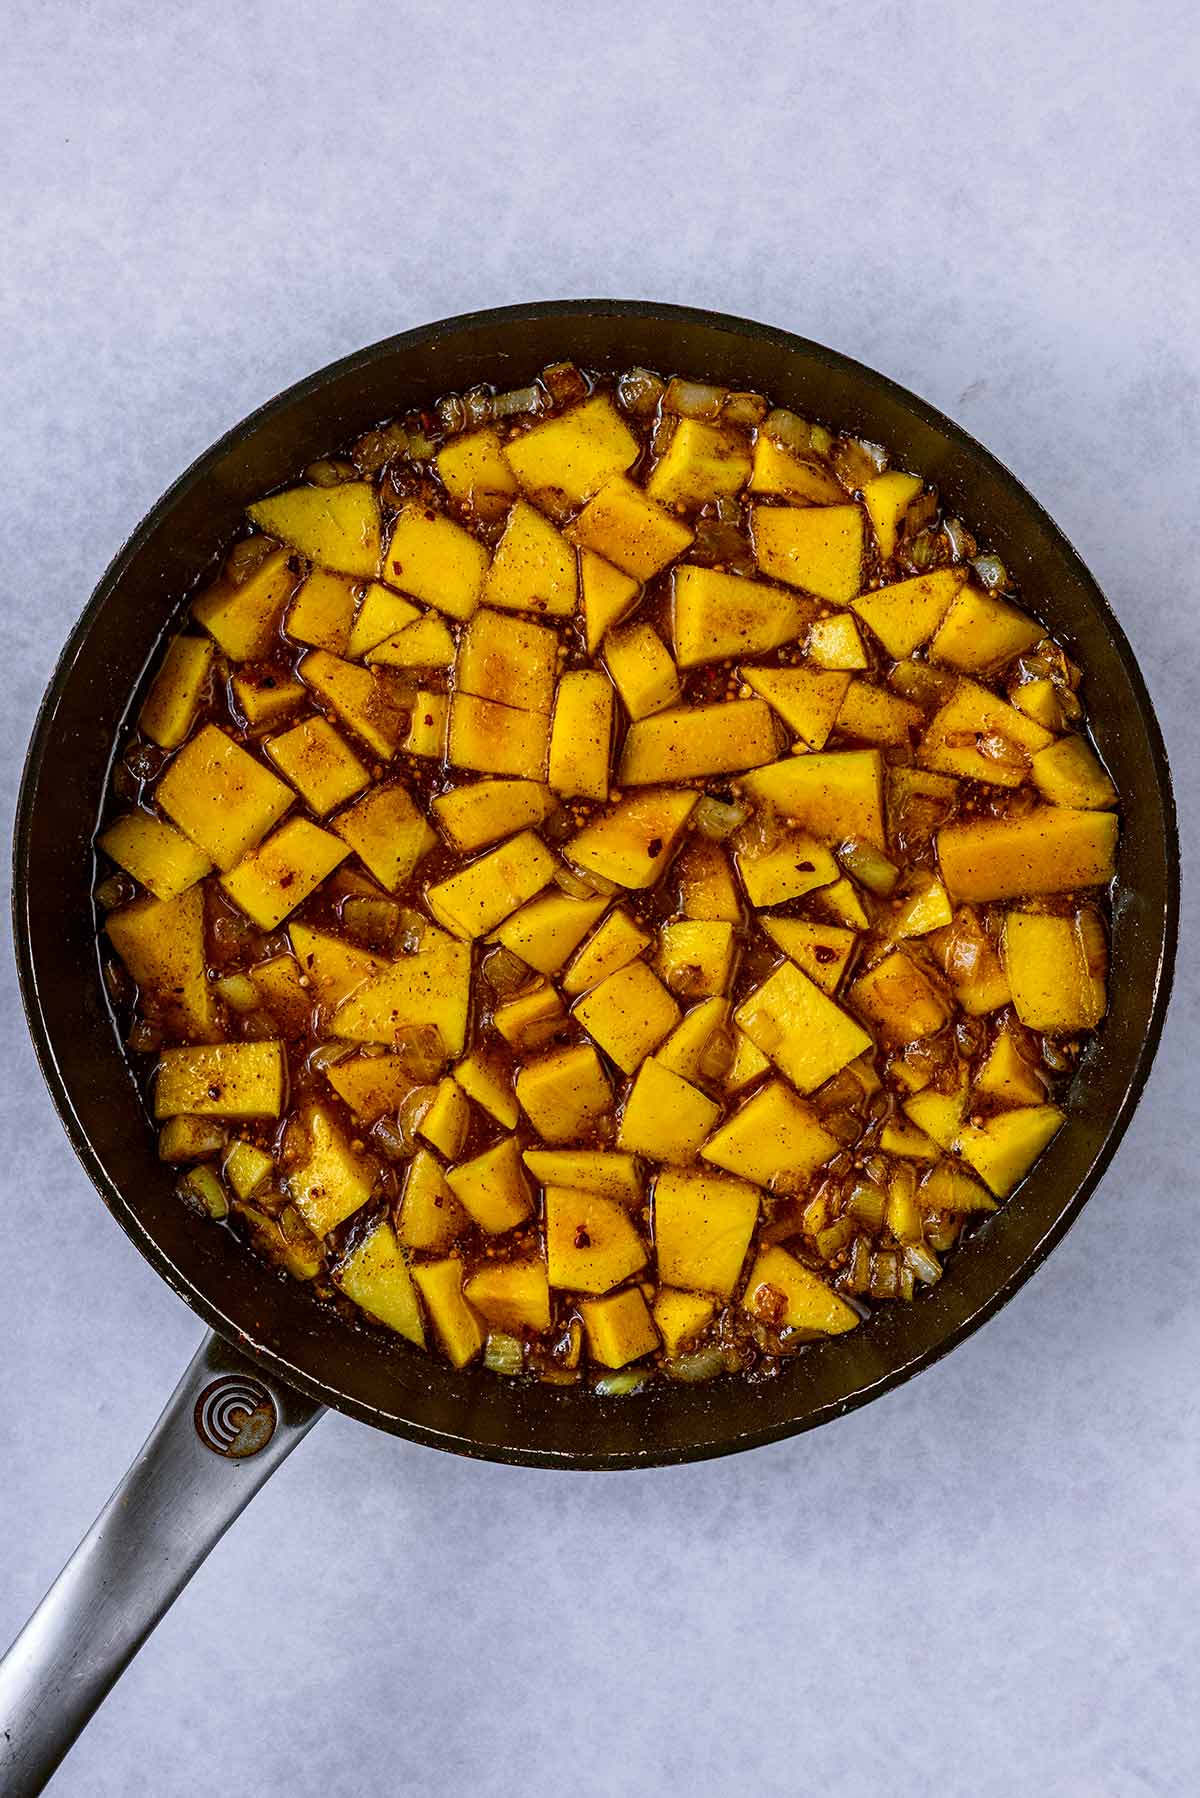 Chopped mangoes cooking in the pan.